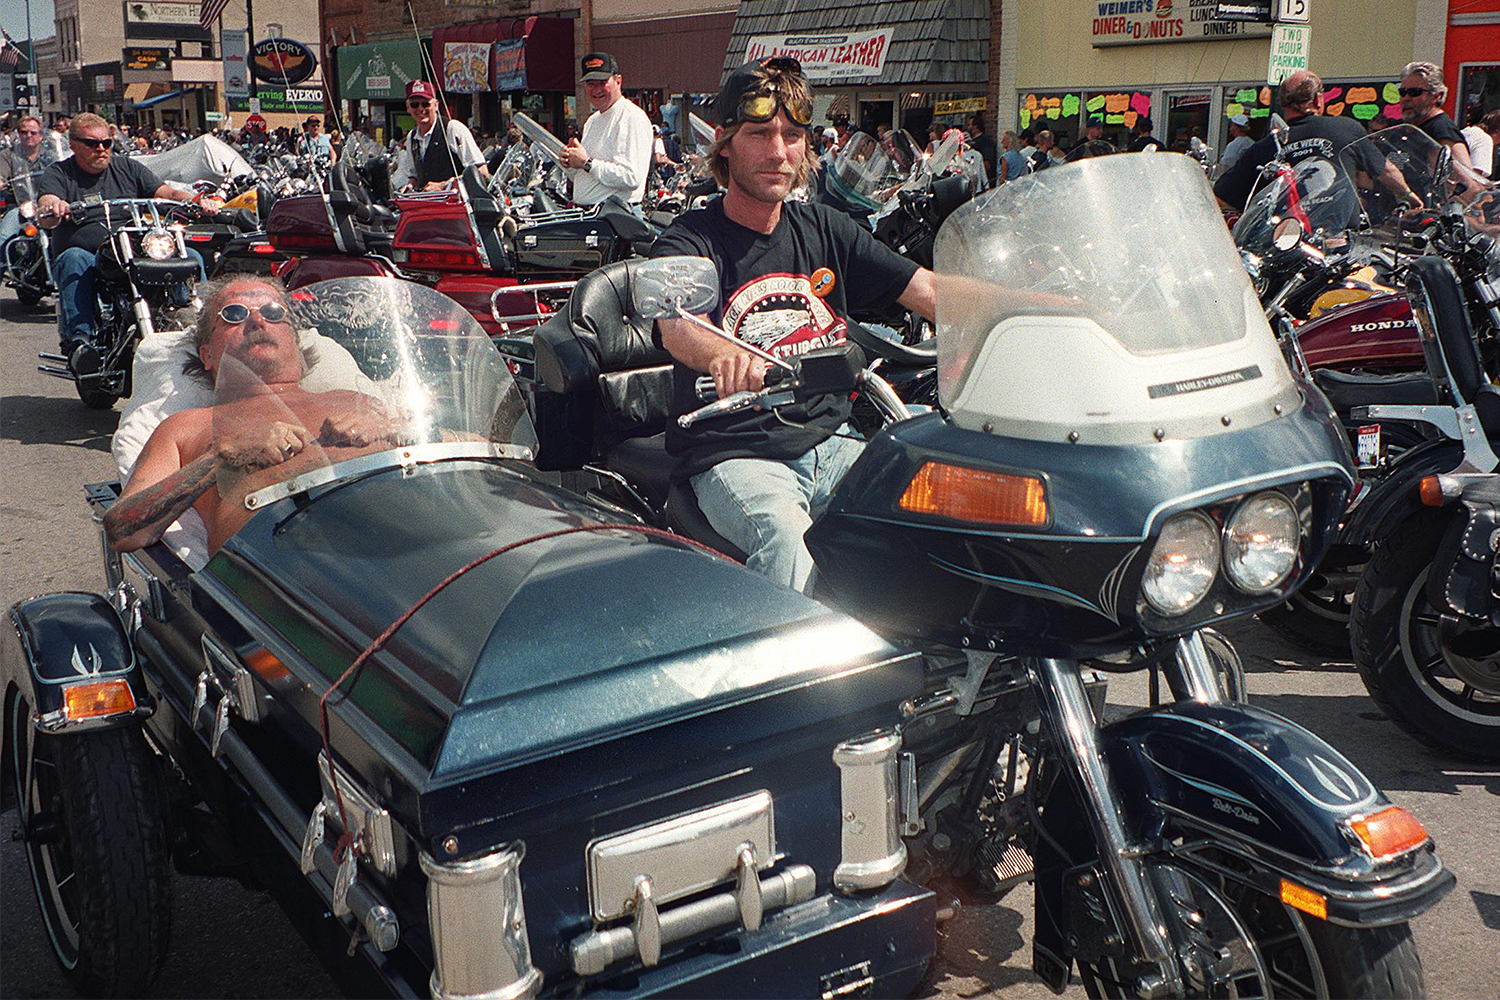 Two bikers at Sturgis in South Dakota in 2001, one in a coffin sidecar